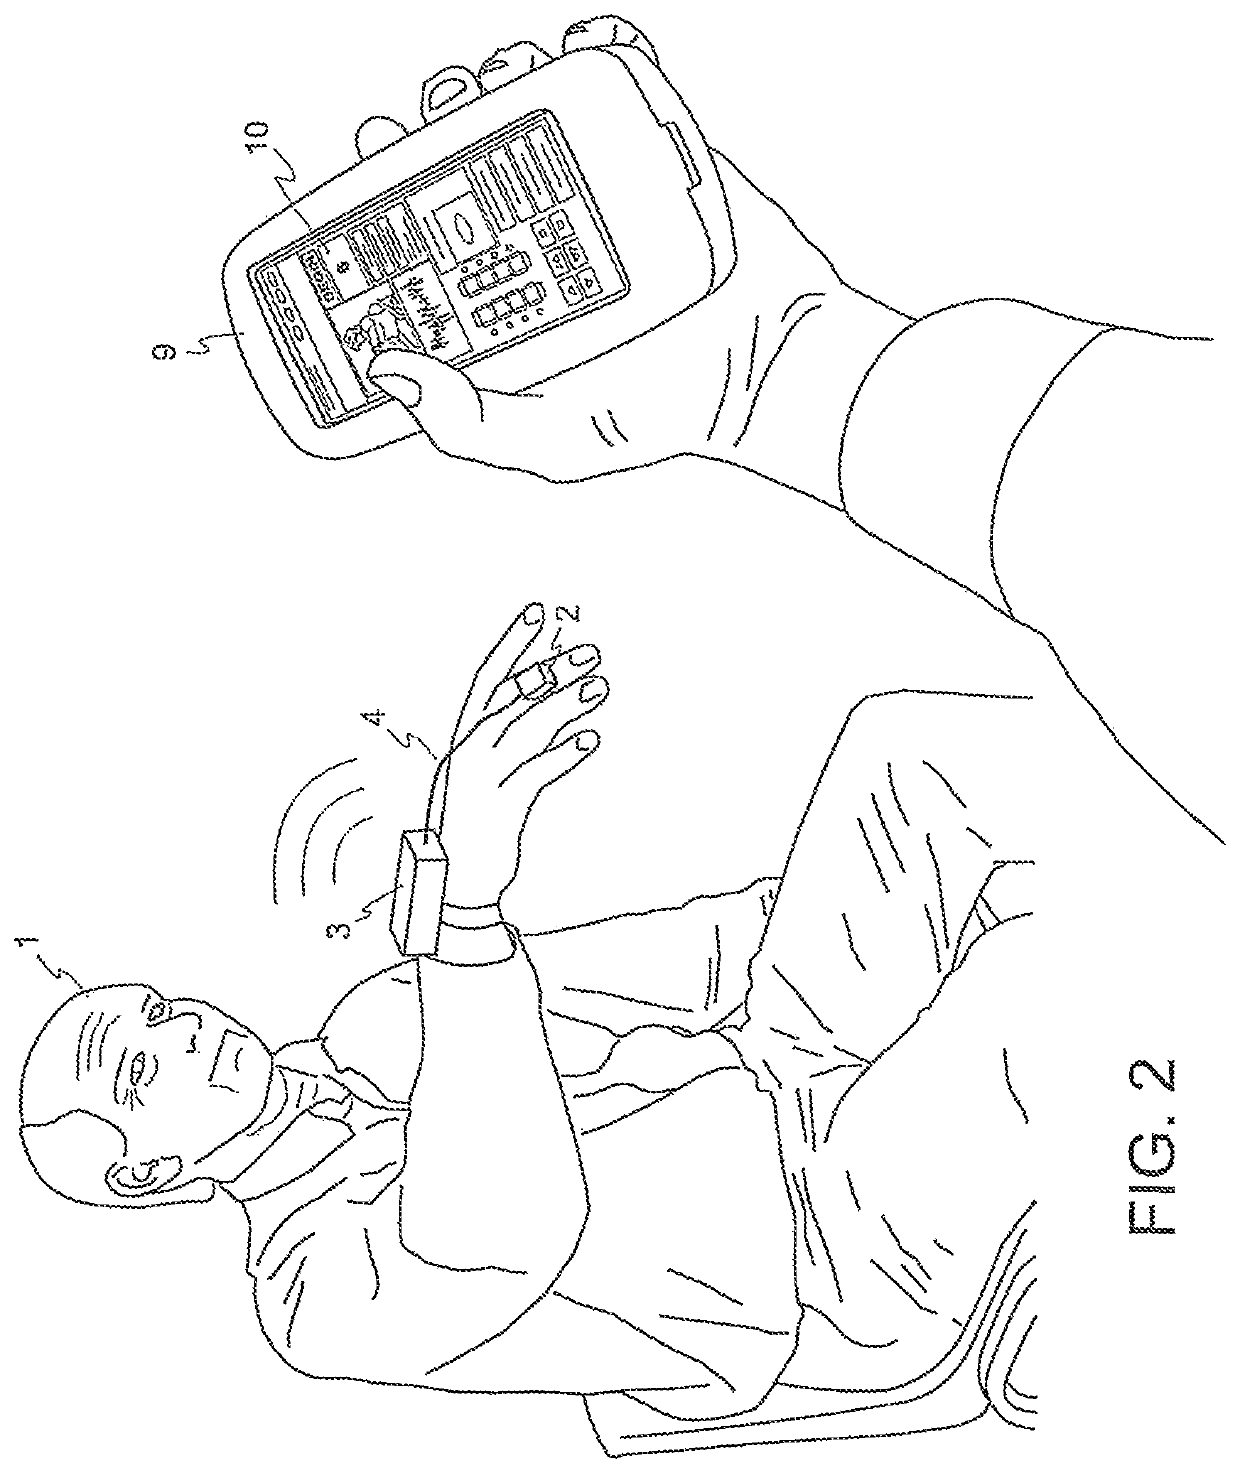 Movement disorder therapy system, devices and methods, and methods of remotely tuning